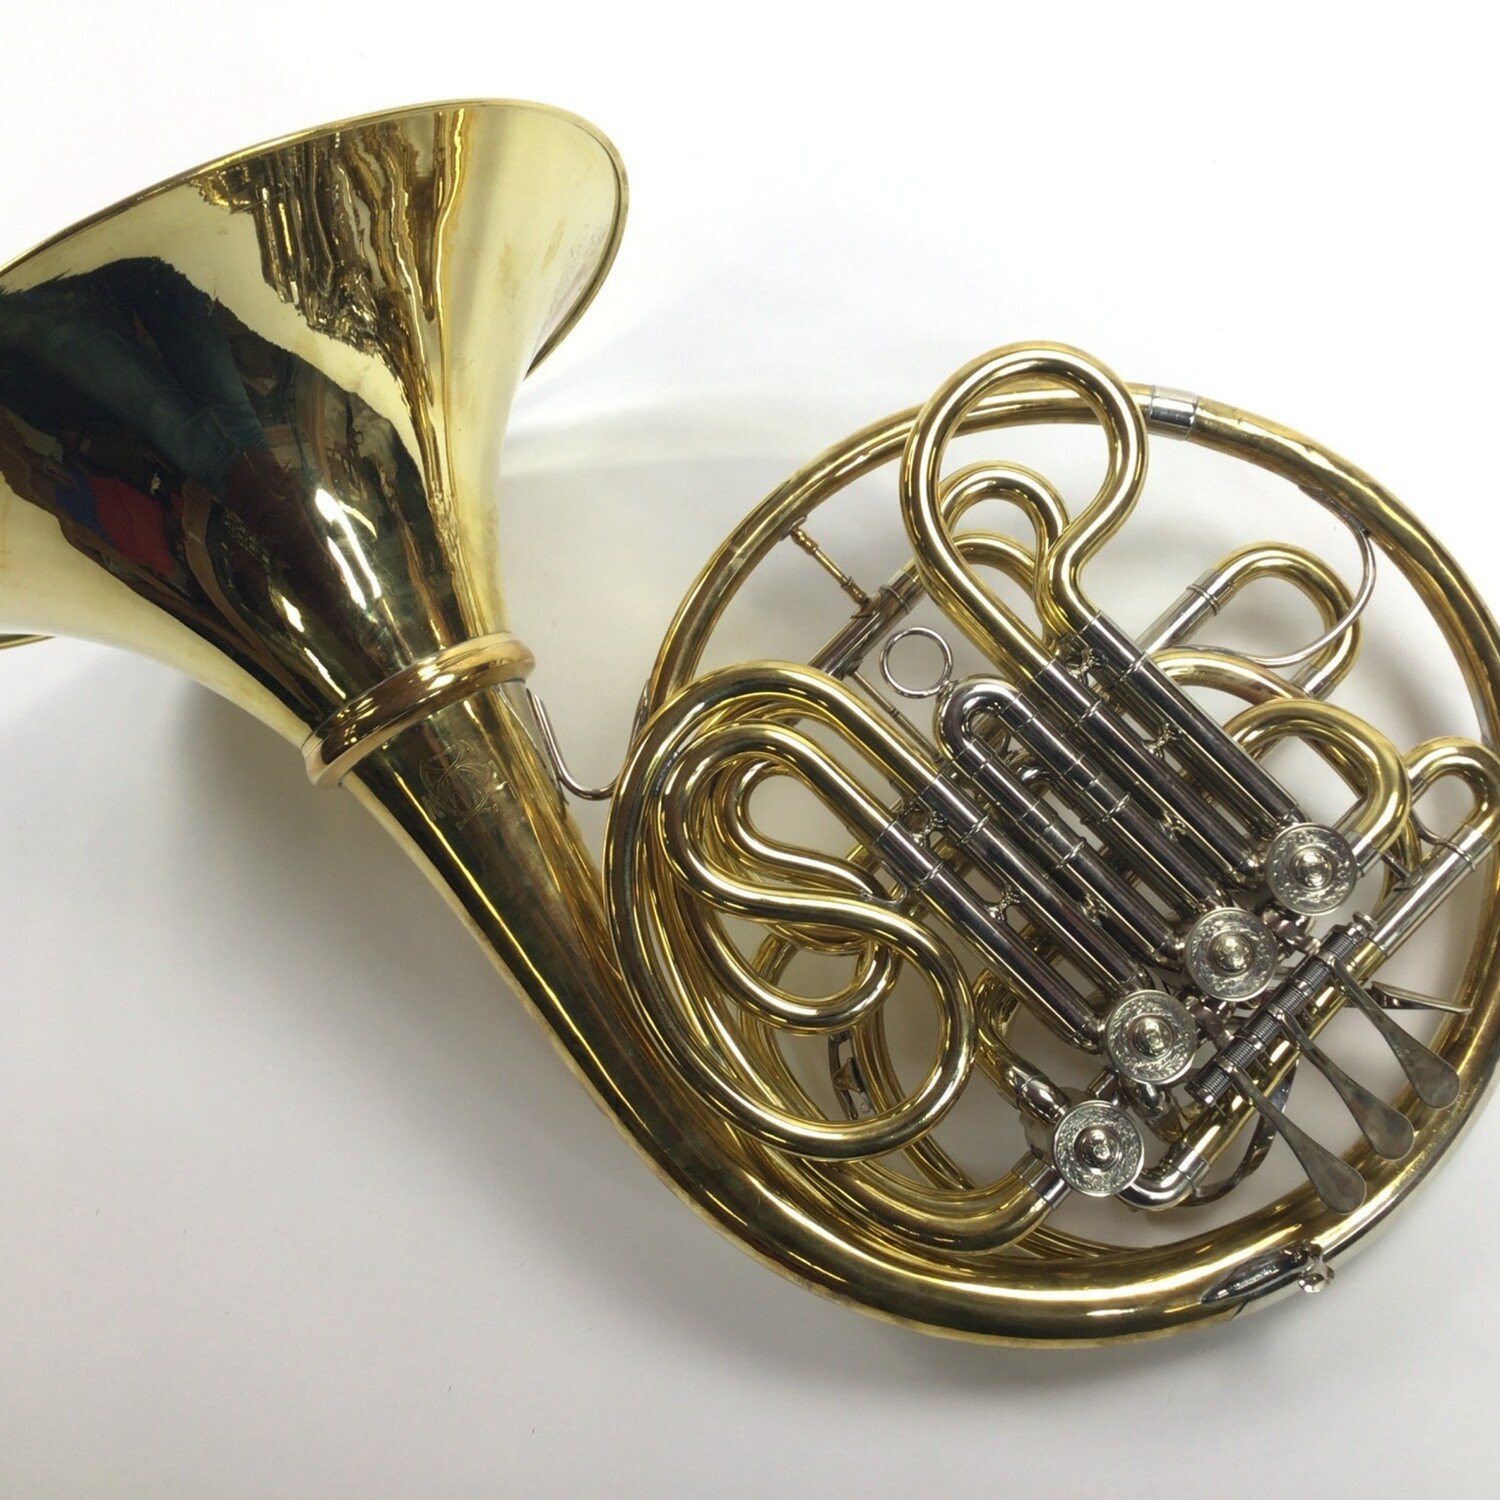 Paxman Musical Instruments Model 20 F/Bb Full Double Horn - Yellow